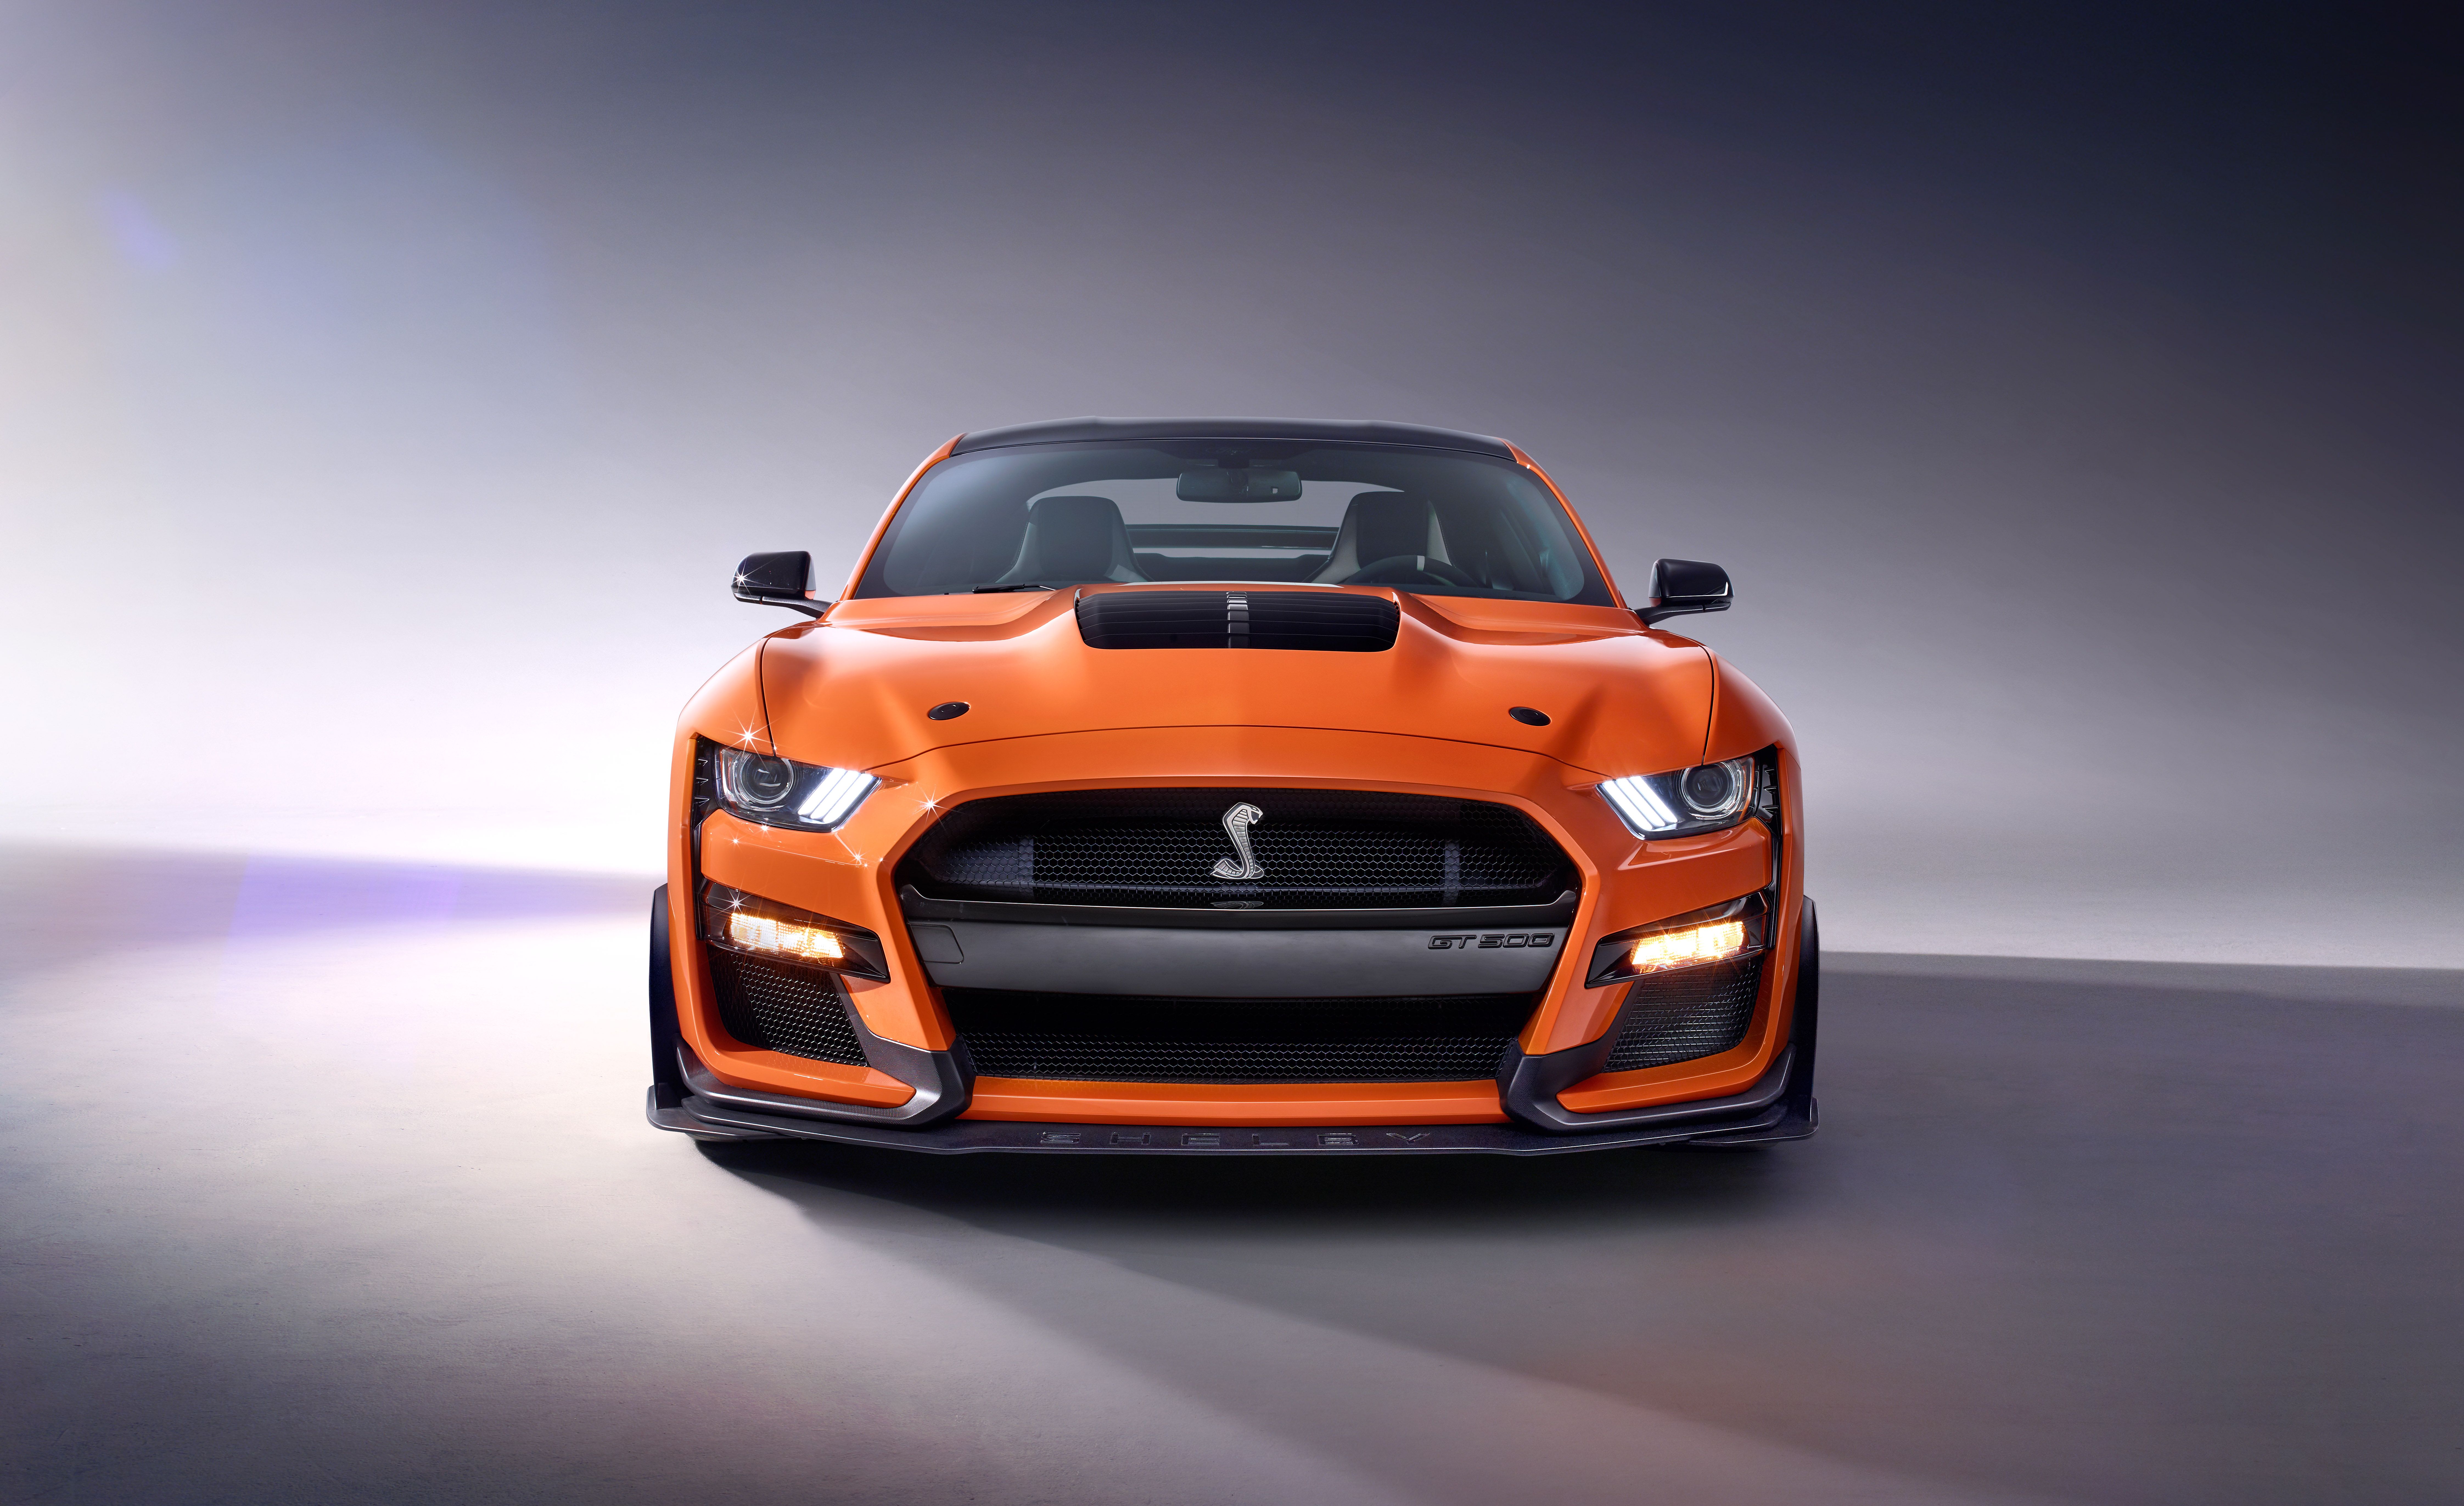 2020 Ford Mustang Shelby Gt500 Reviews Ford Mustang Shelby Gt500